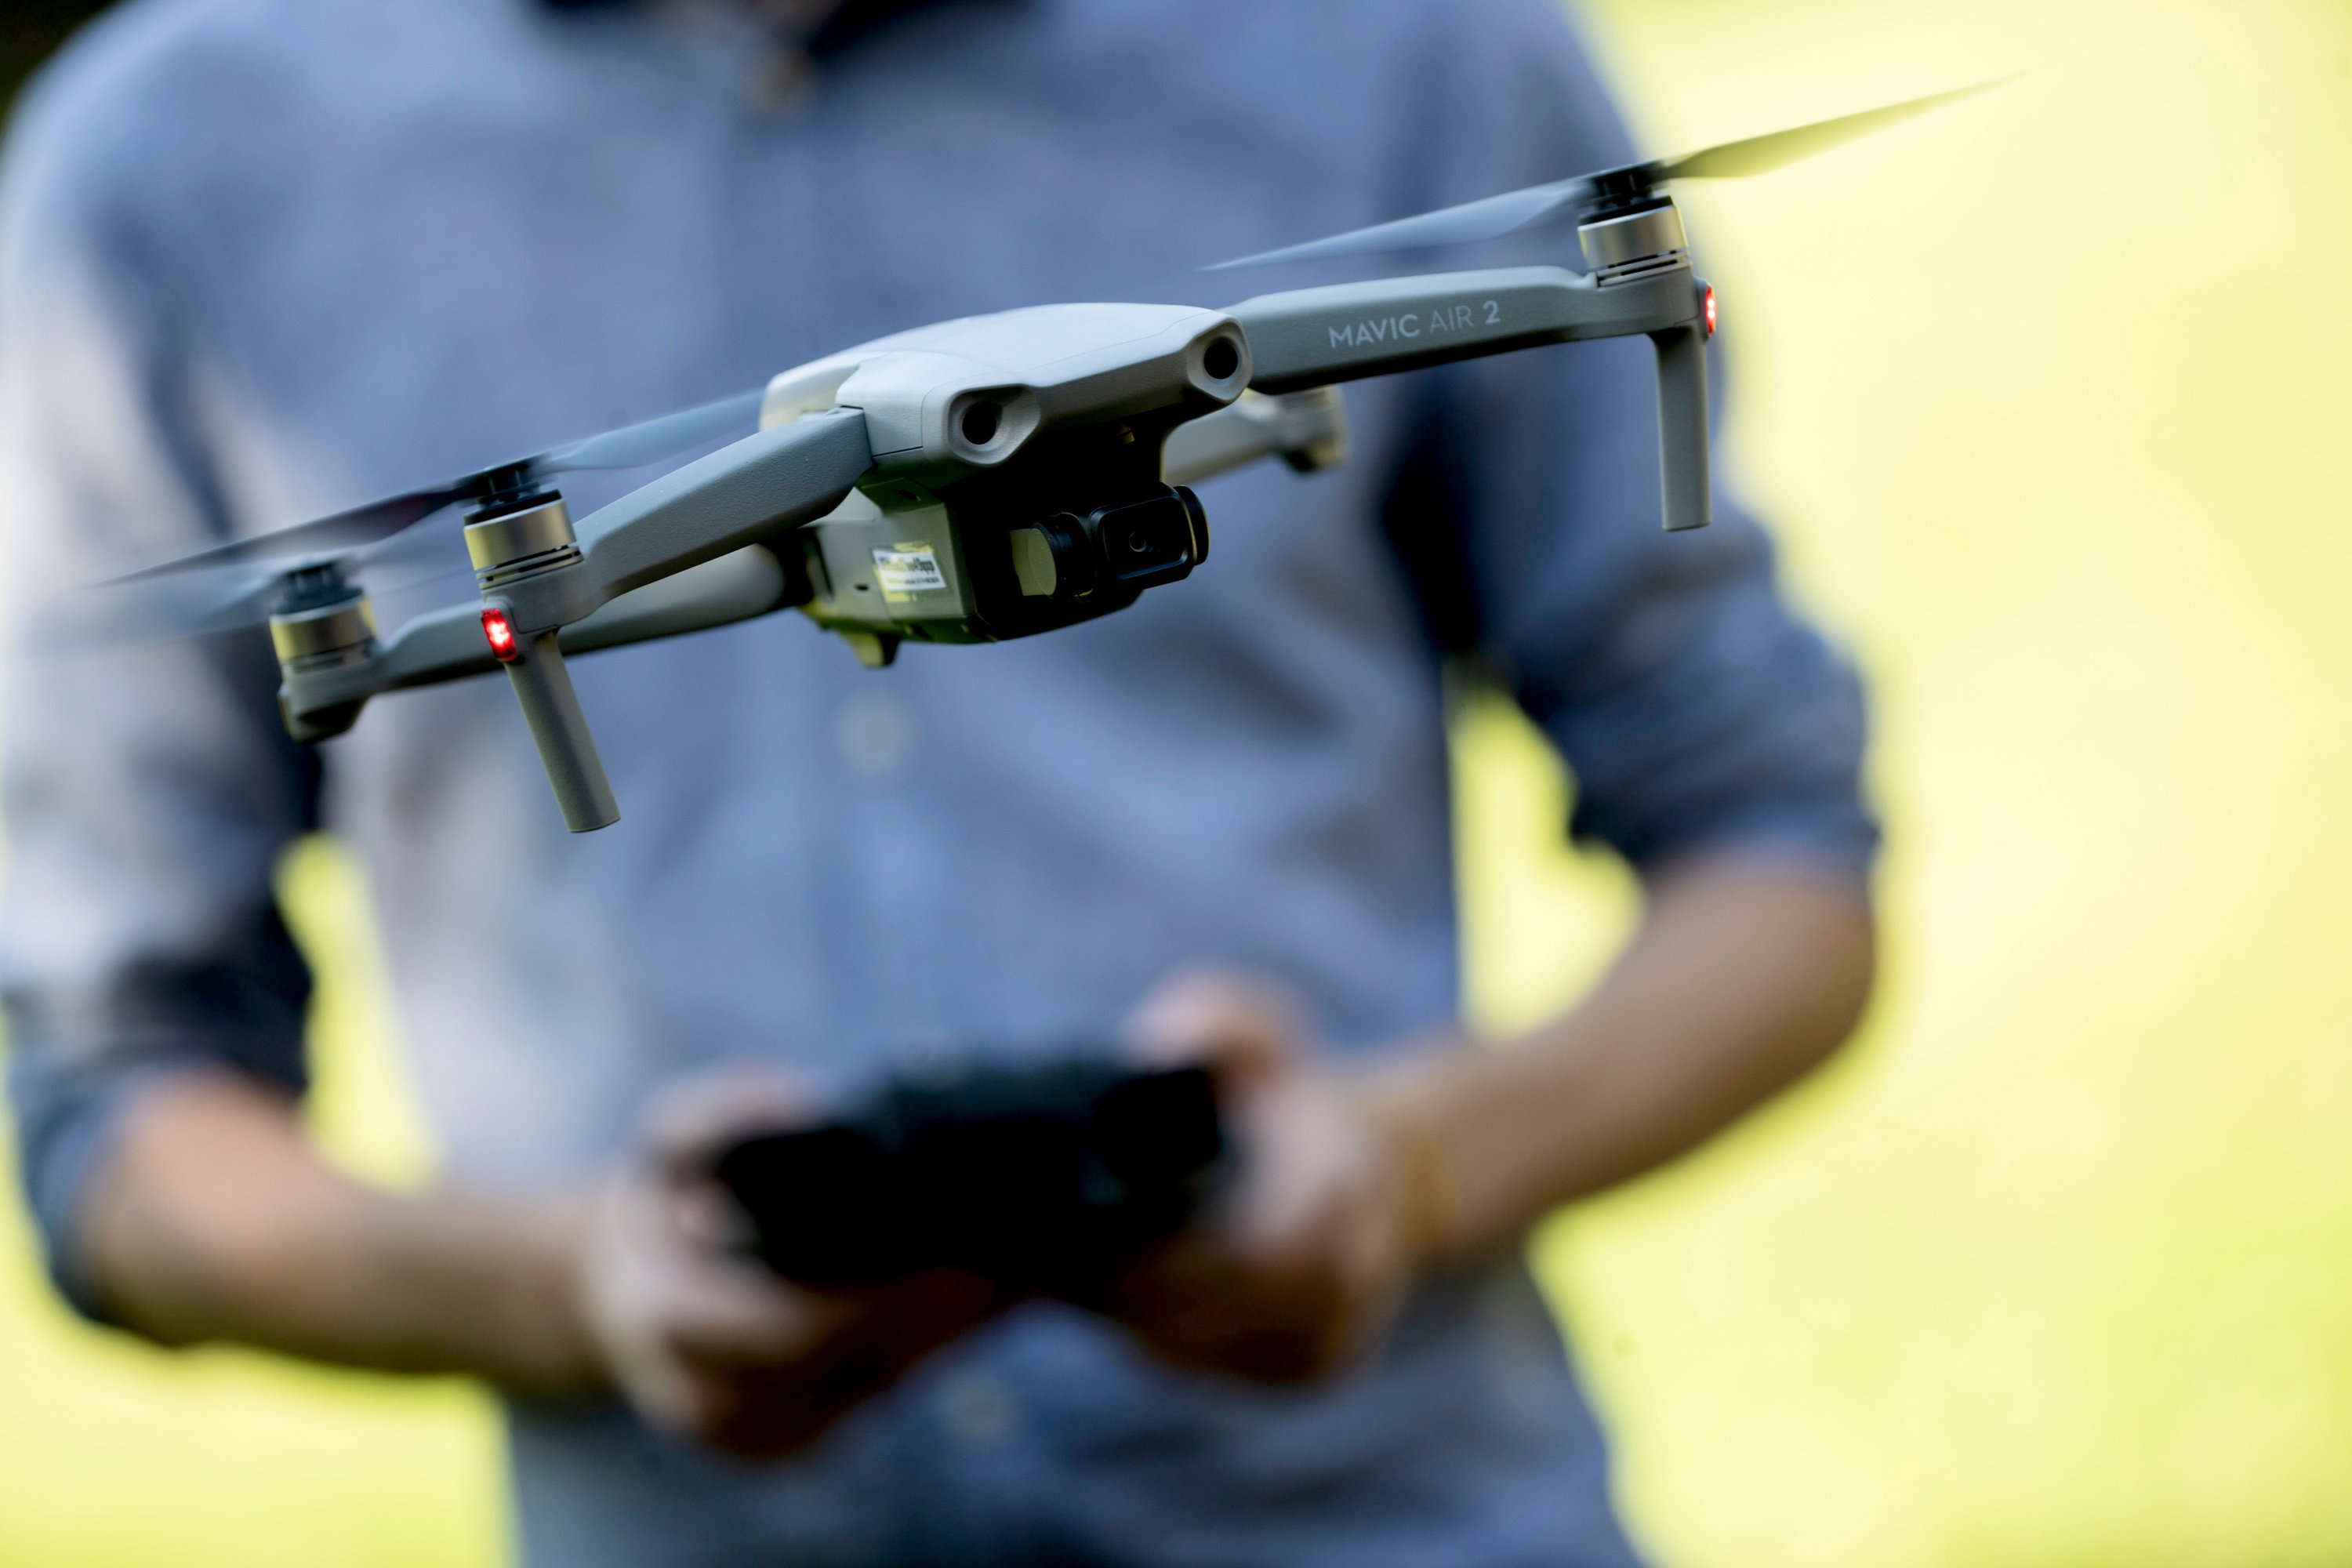 Flying drones is prohibited in Morocco, Iran, Kenya and Egypt, and a special permit is required in many other countries. (DPA)